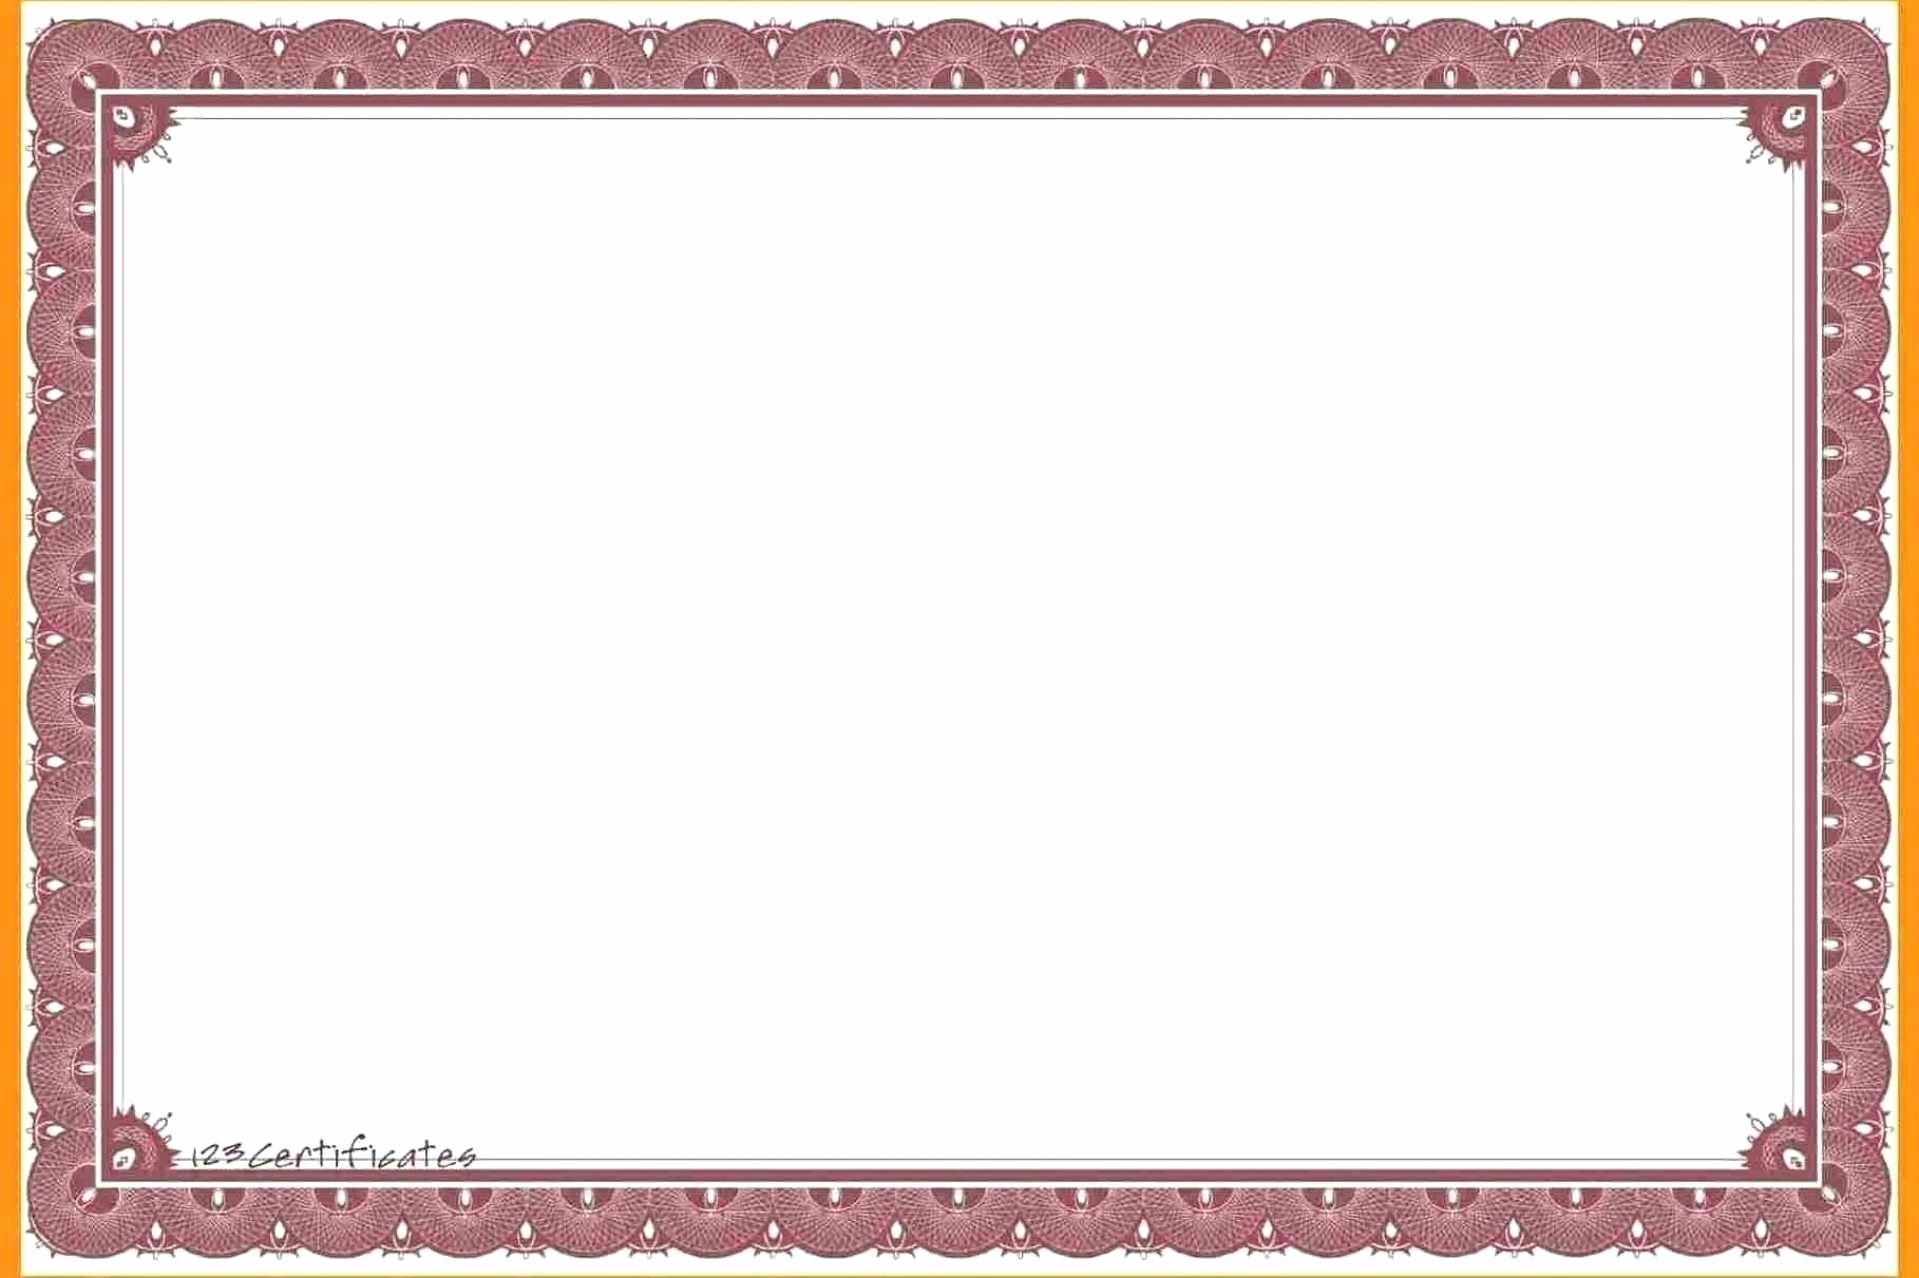 Certificate Border Template for Word Luxury Certificate Border Template Microsoft Word